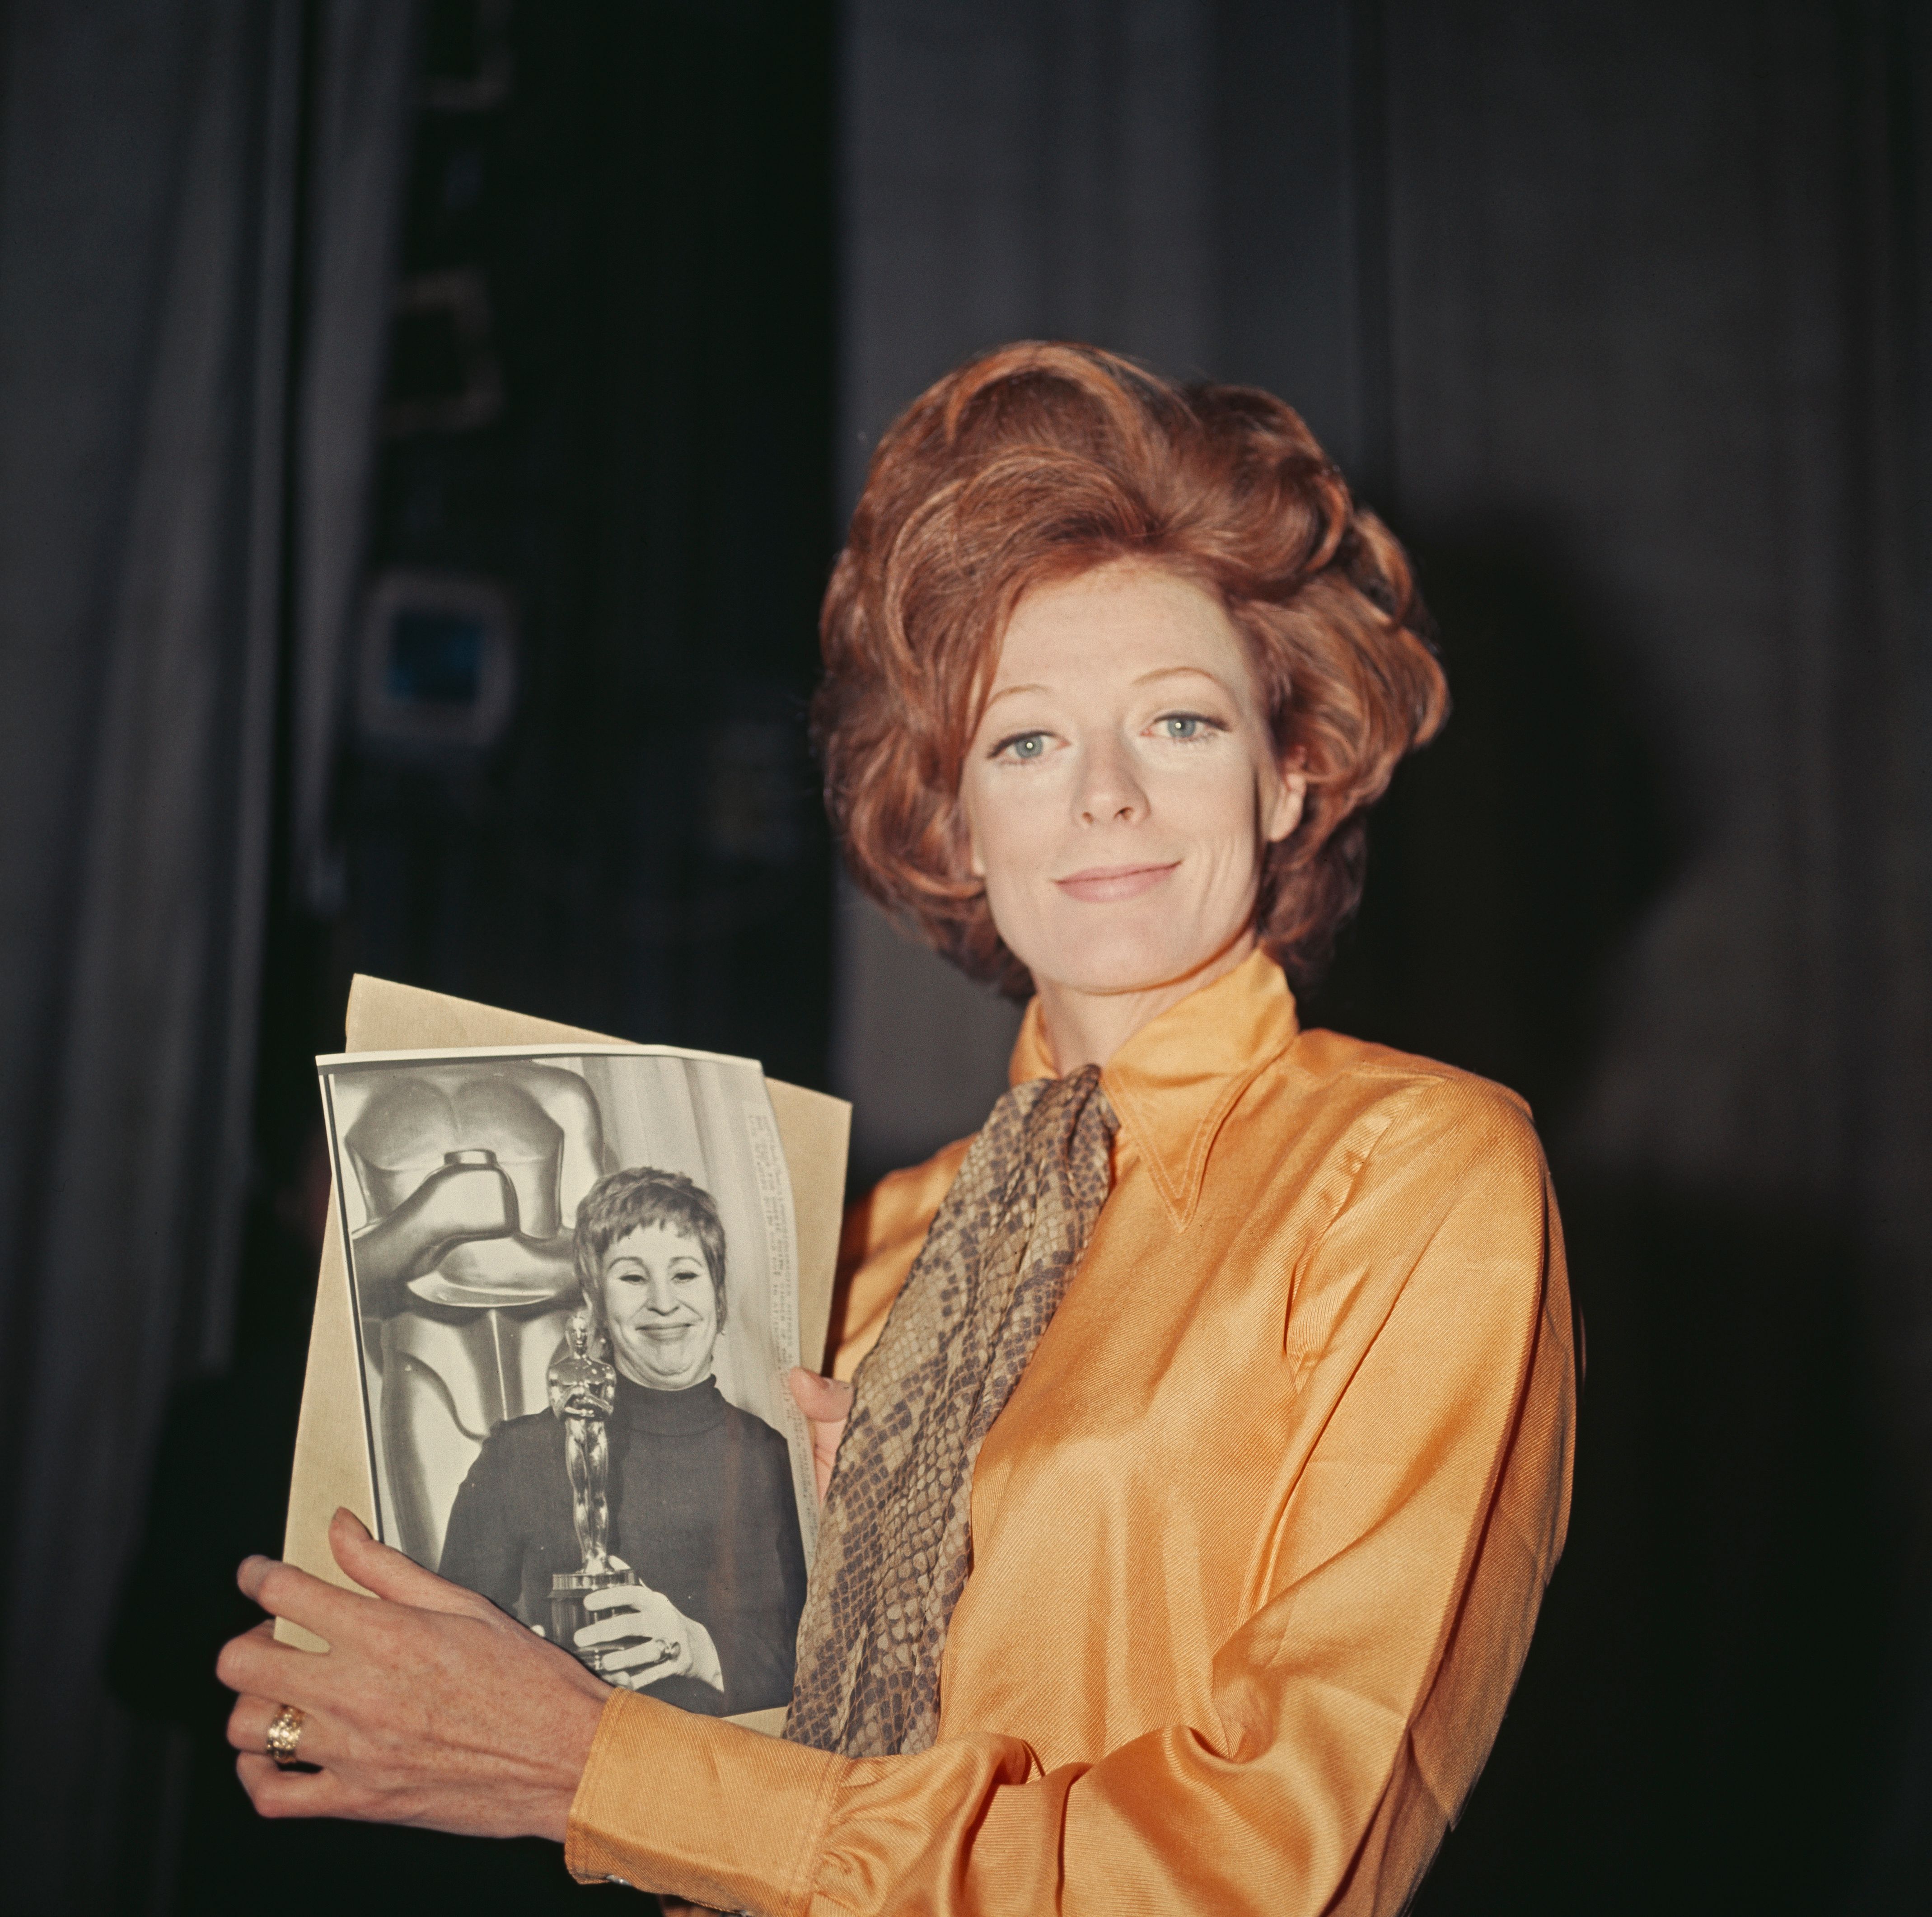 Maggie Smith holds a photo of American actress Alice Ghostley at the 42nd Academy Awards, at an Oscars party at the Old Vic Theatre in London on 10th April 1970. | Source: Getty Images